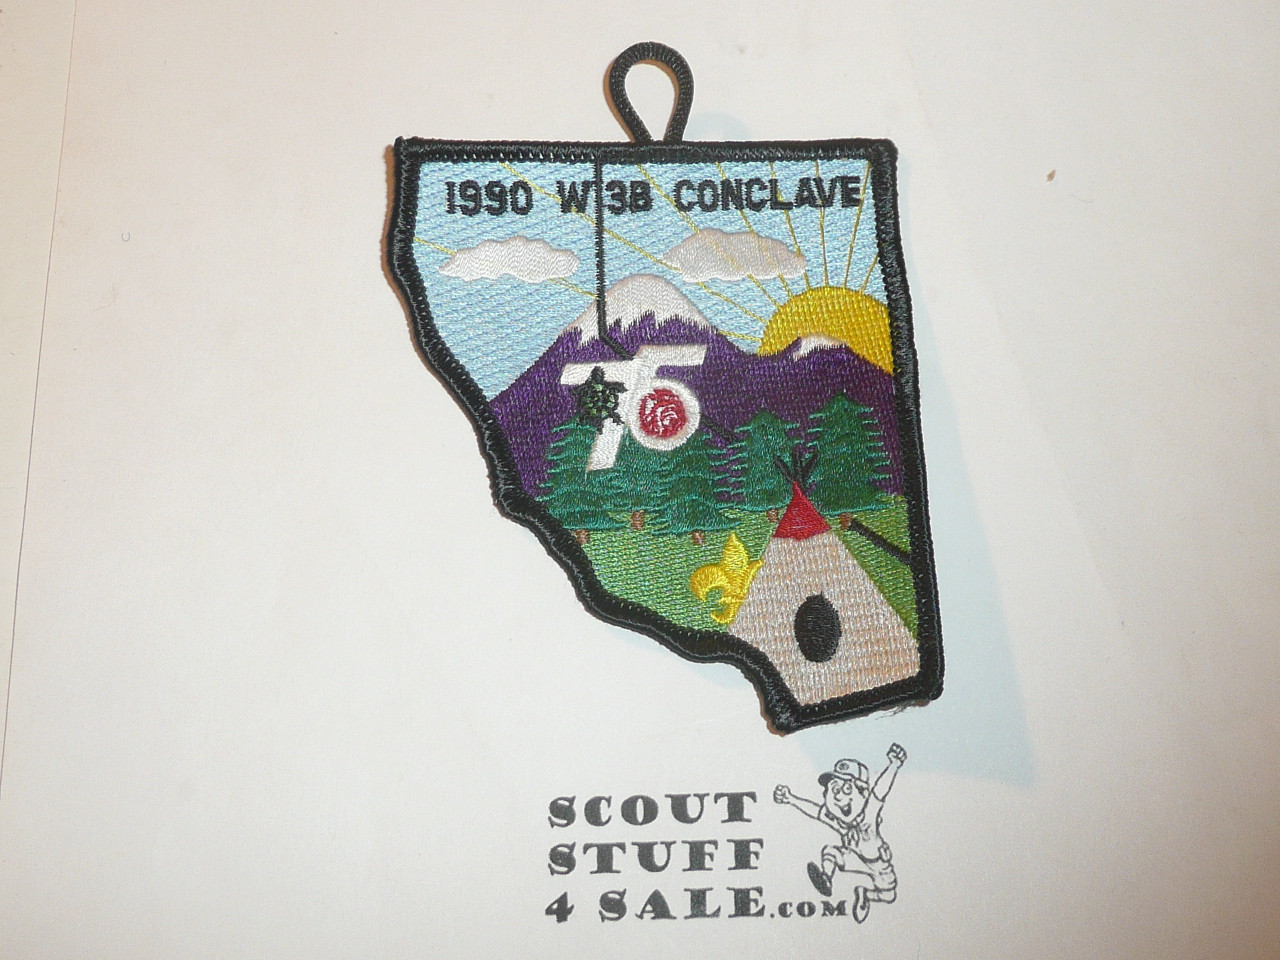 Section W3B 1990 O.A. Conclave Patch with button loop - Scout